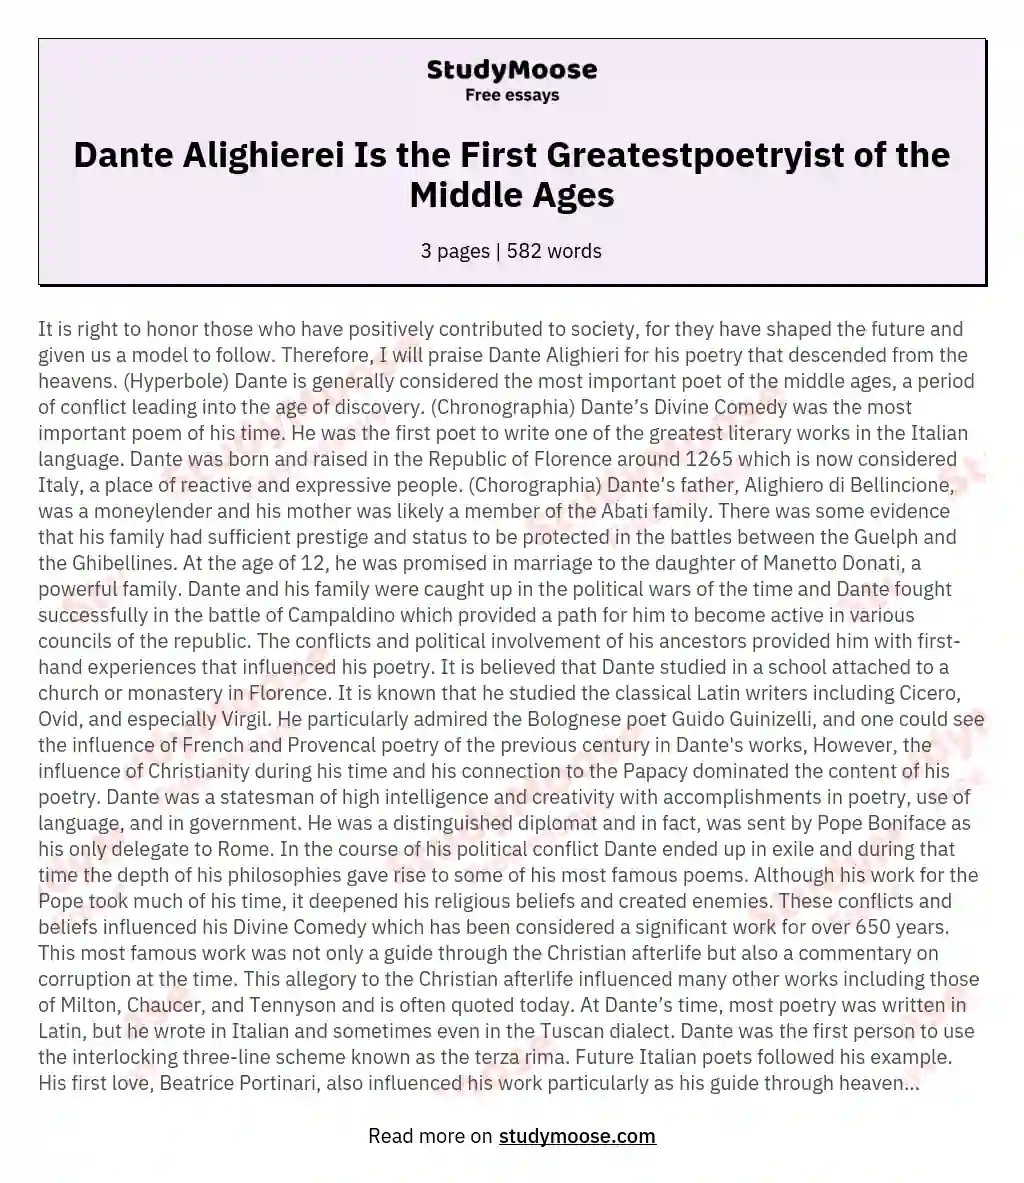 Dante Alighierei Is the First Greatestpoetryist of the Middle Ages essay